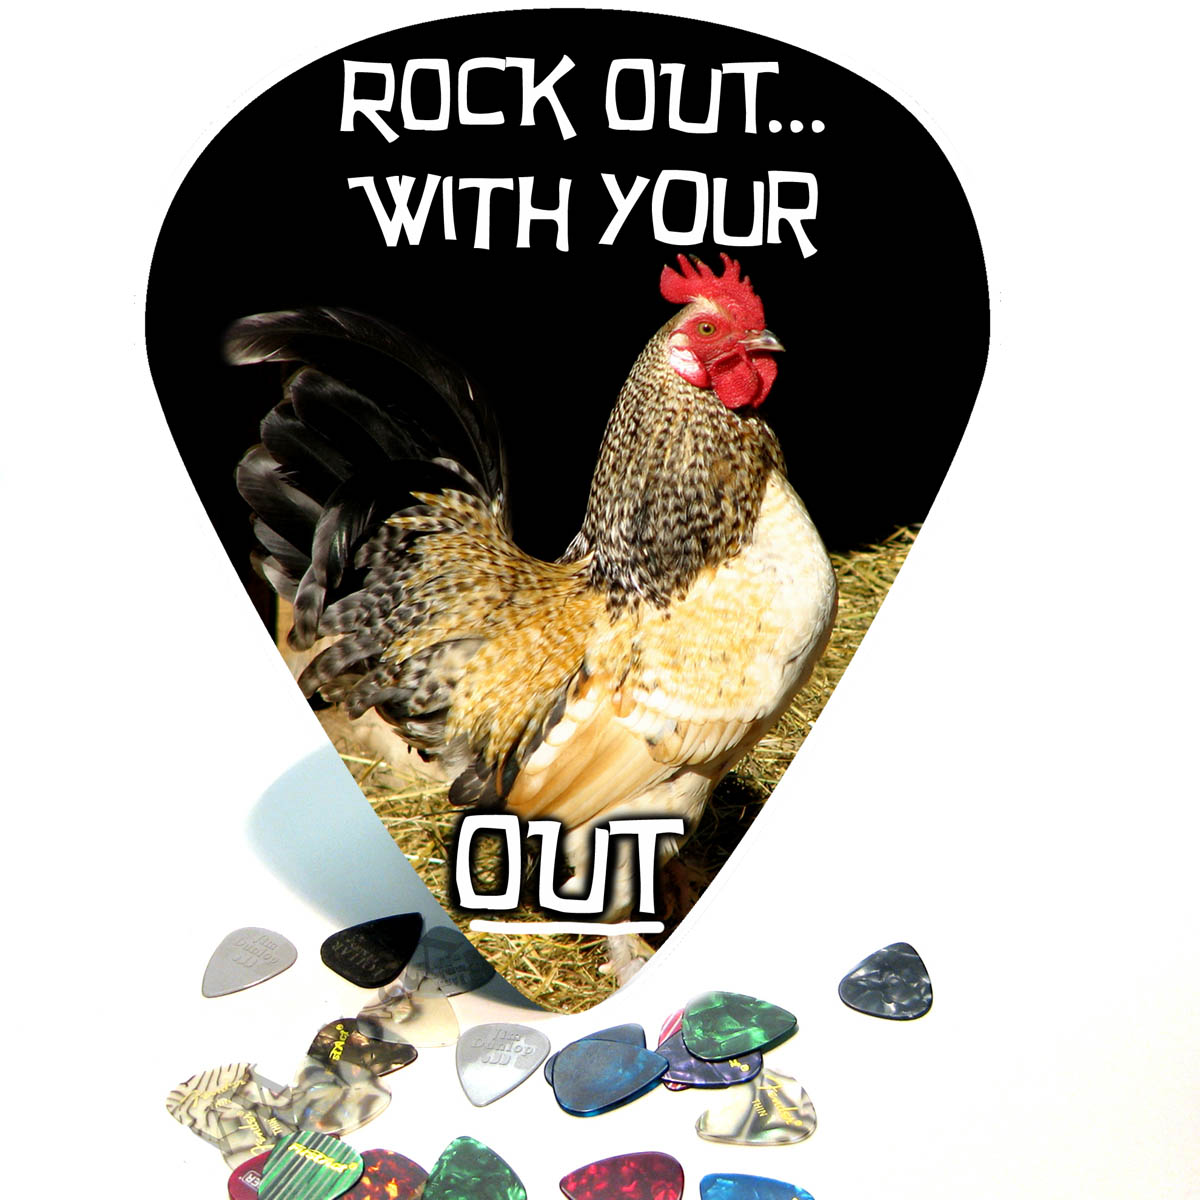 Rock Out With Your C!ck Out Giant Guitar Pick Wall Art - 1035